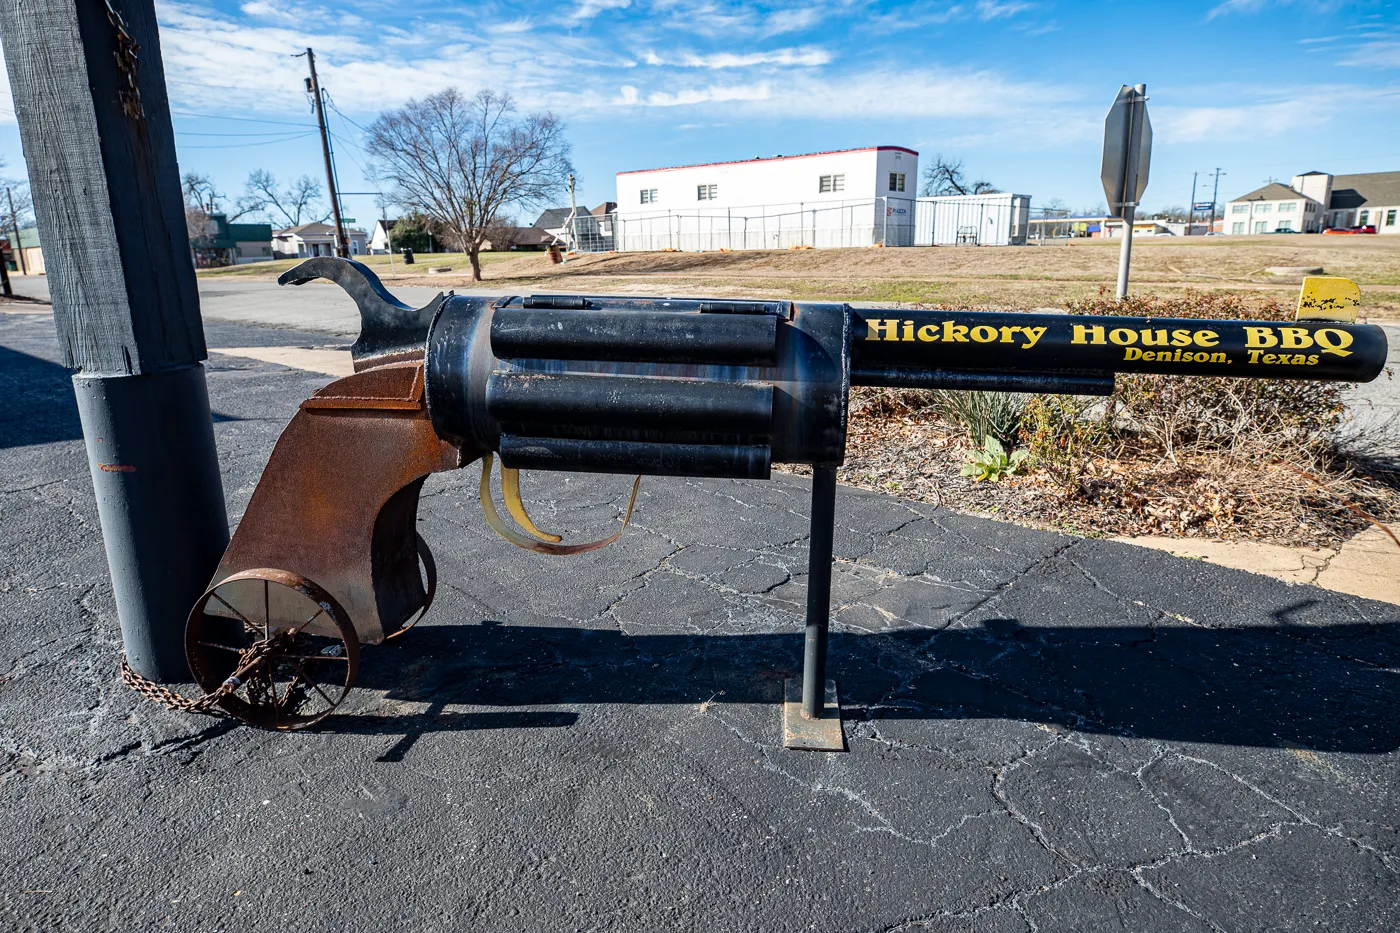 Big BBQ Six-Shooter in Denison, Texas - Roadside Attraction at Hickory House Barbecue